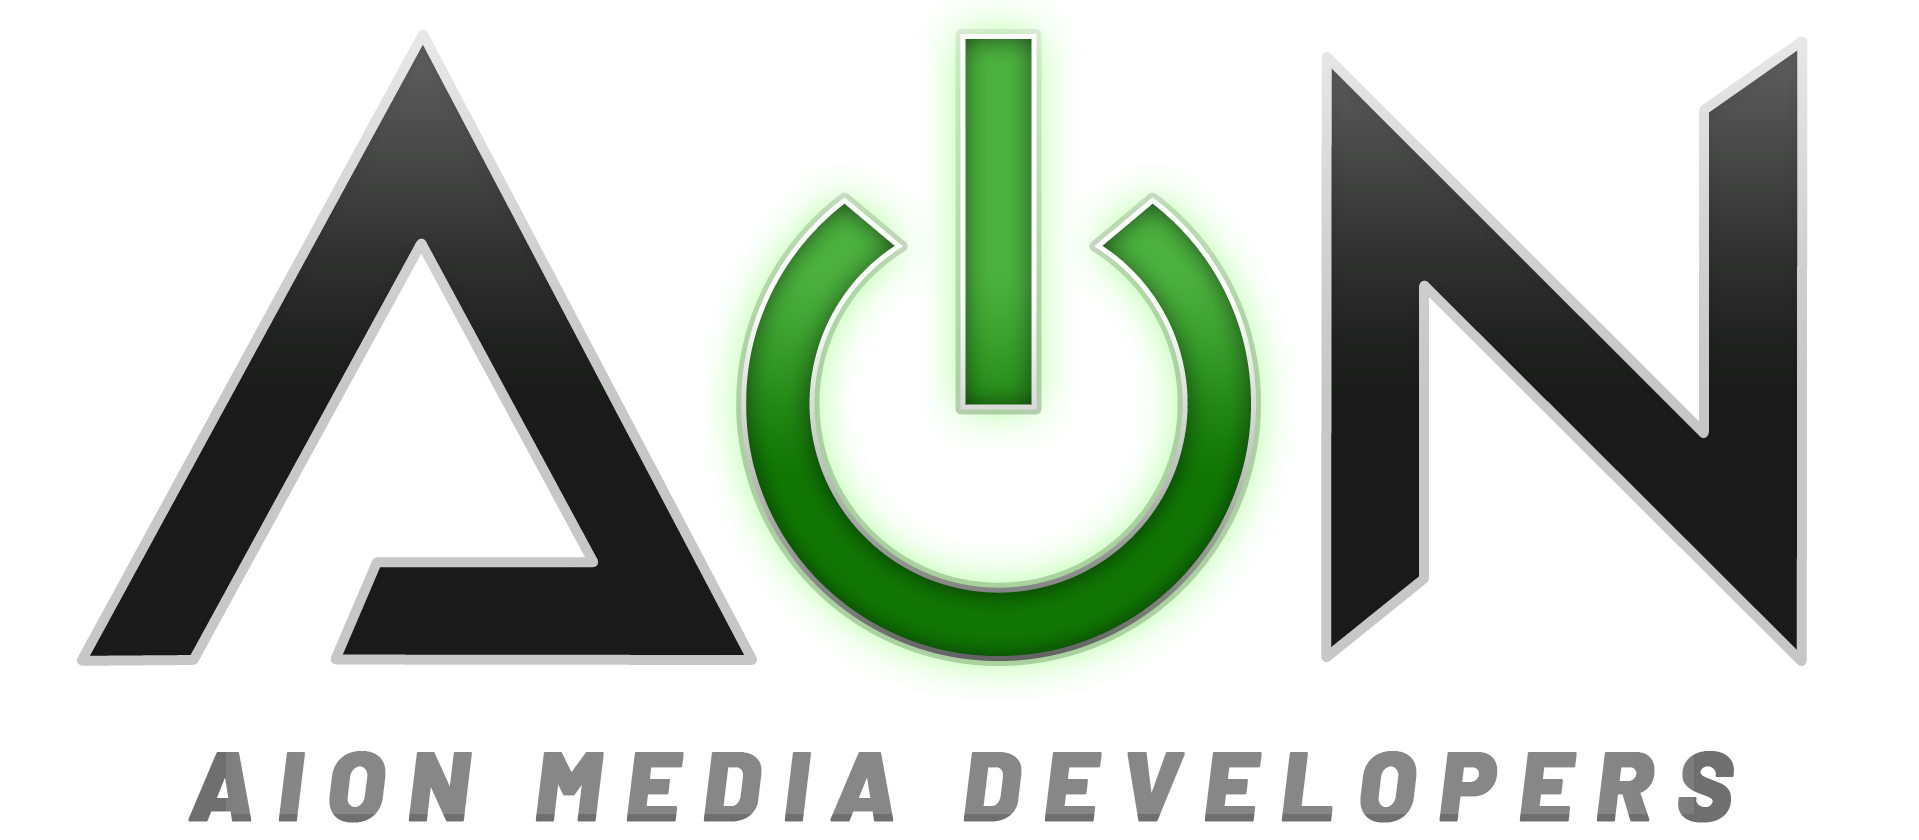 Aion Media Developers